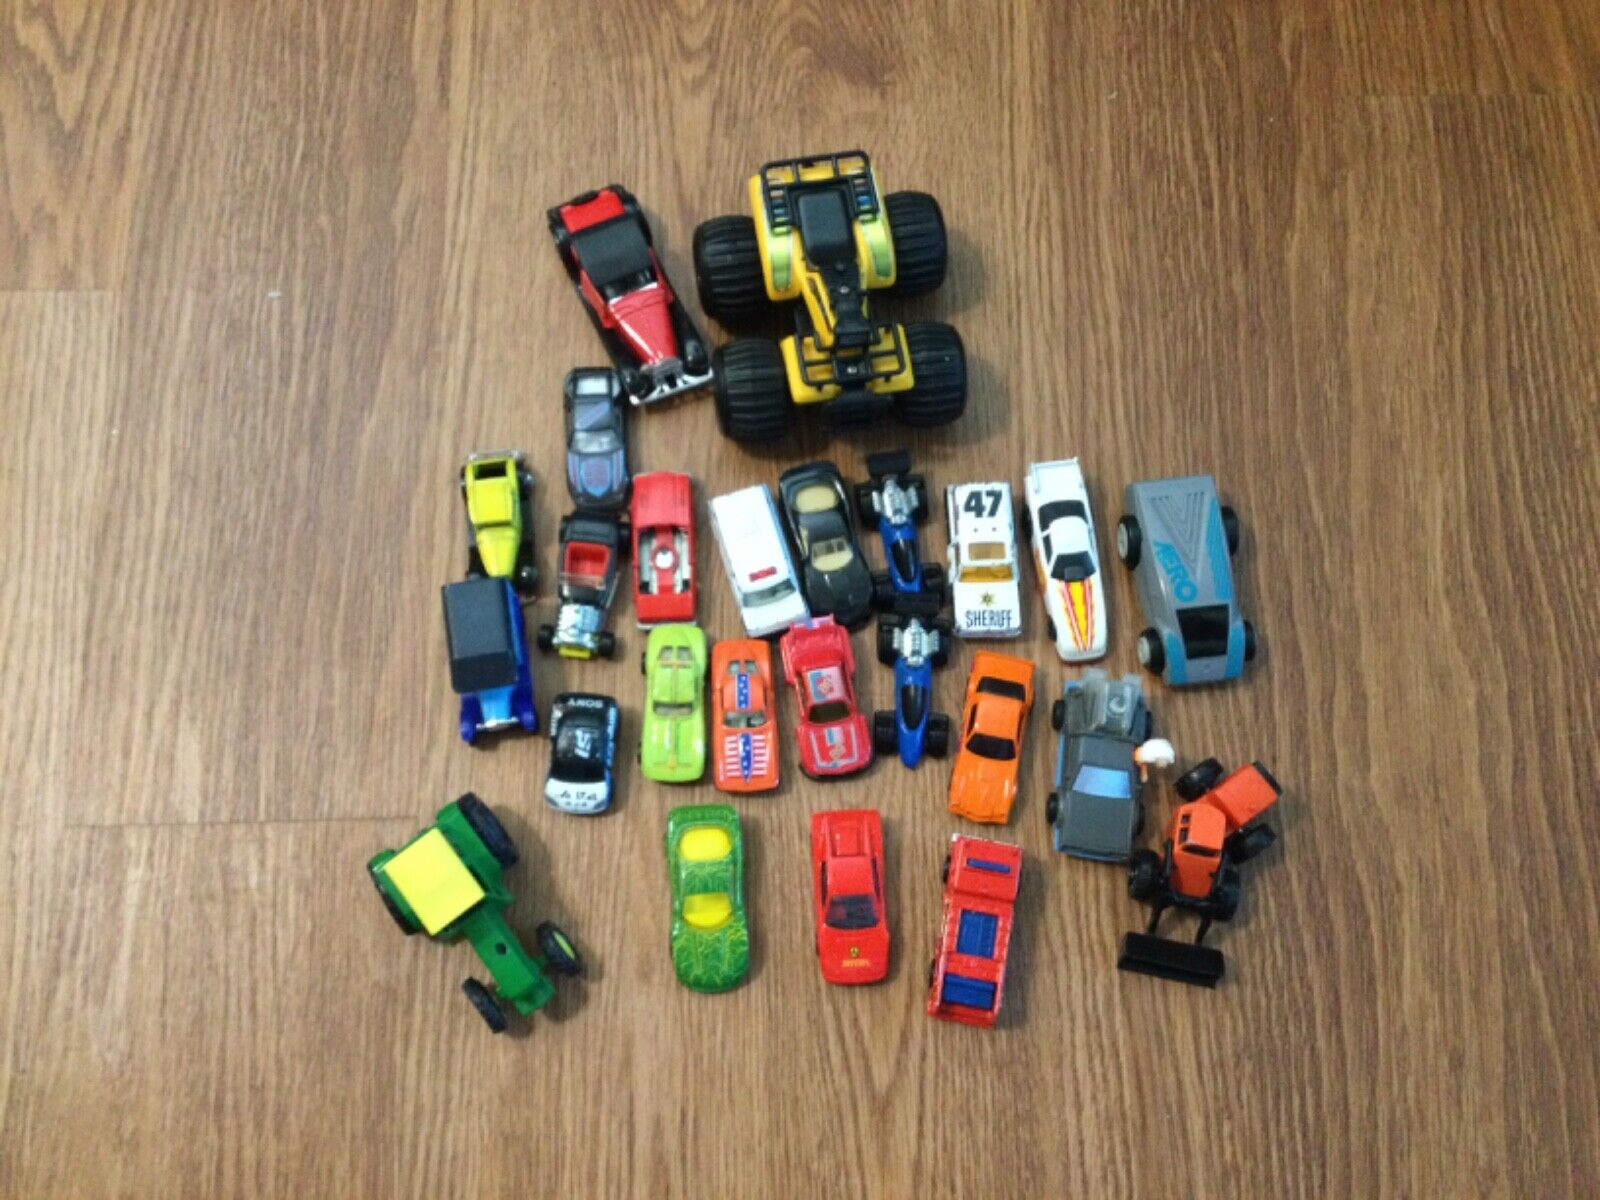 Hot Wheels Vtg Lot of 25 Cars and More~ Tonka~Tractor ~Fire Truck